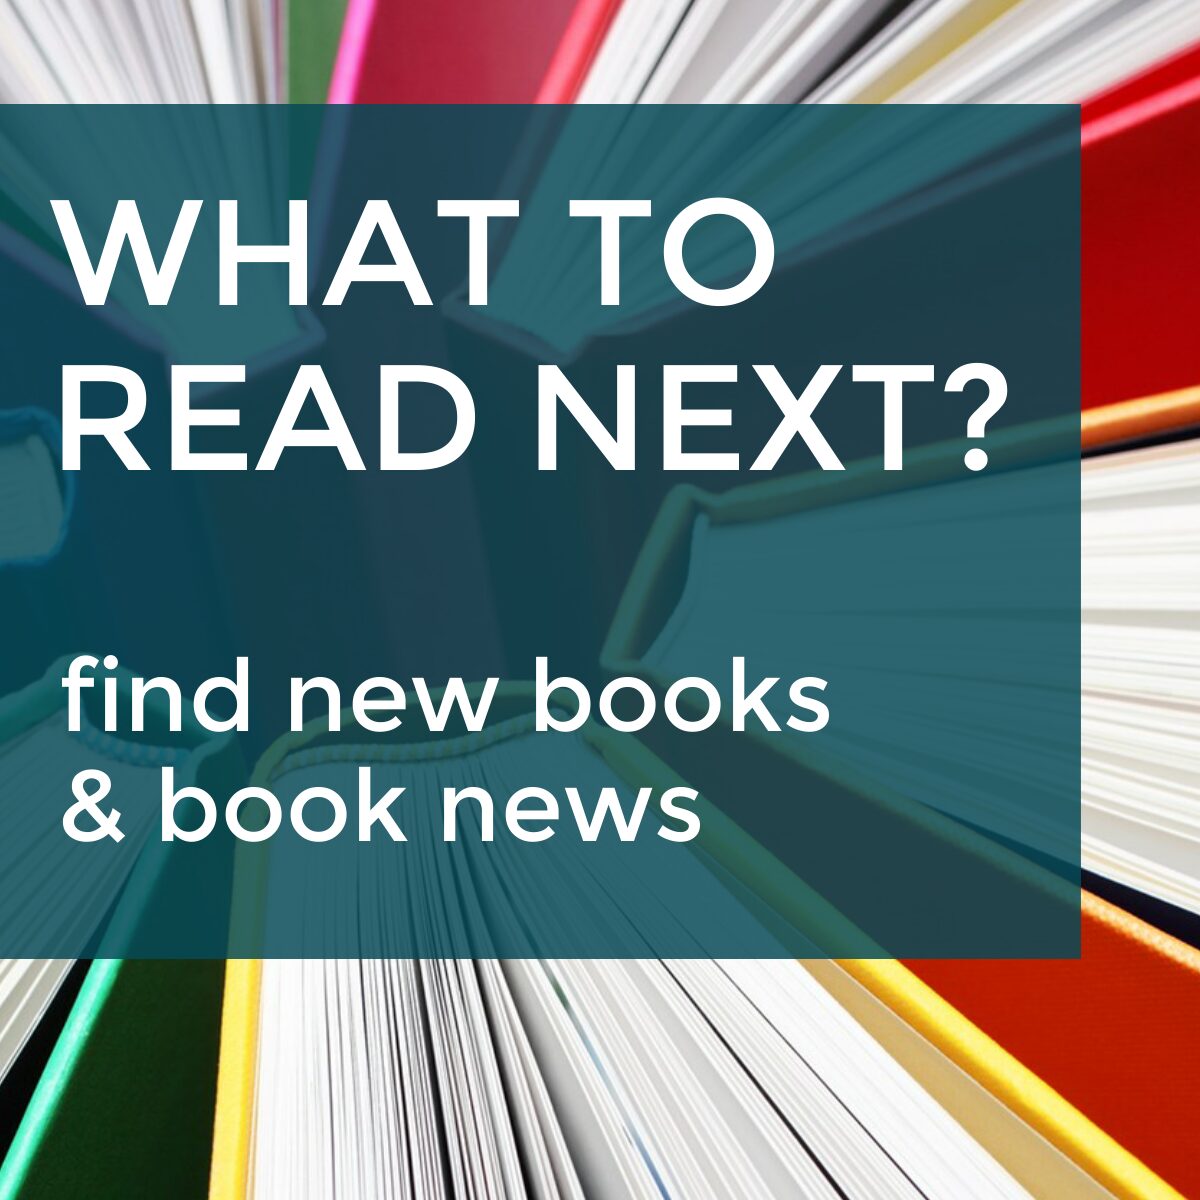 What to read next? Find new books and book news